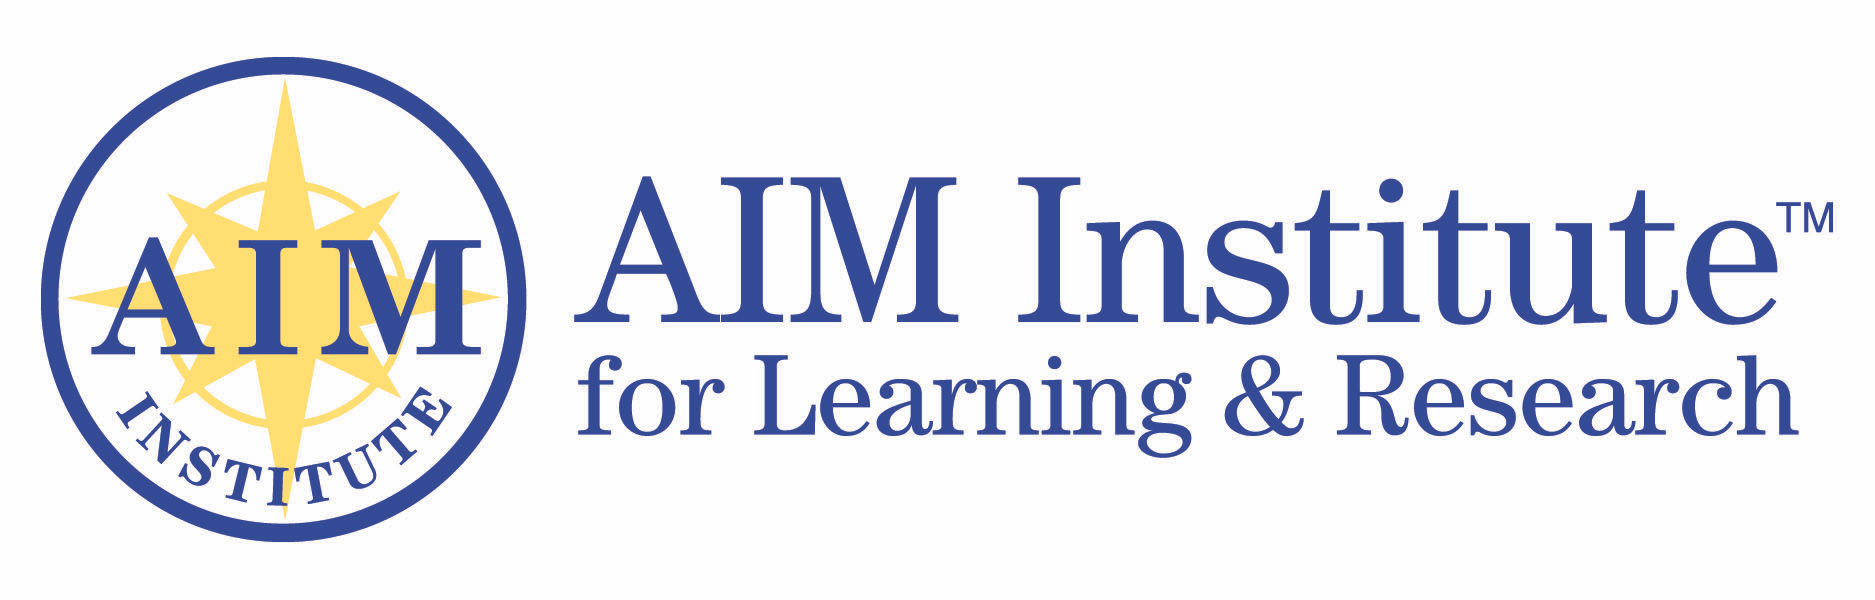 Aim Institute for Learning and Research